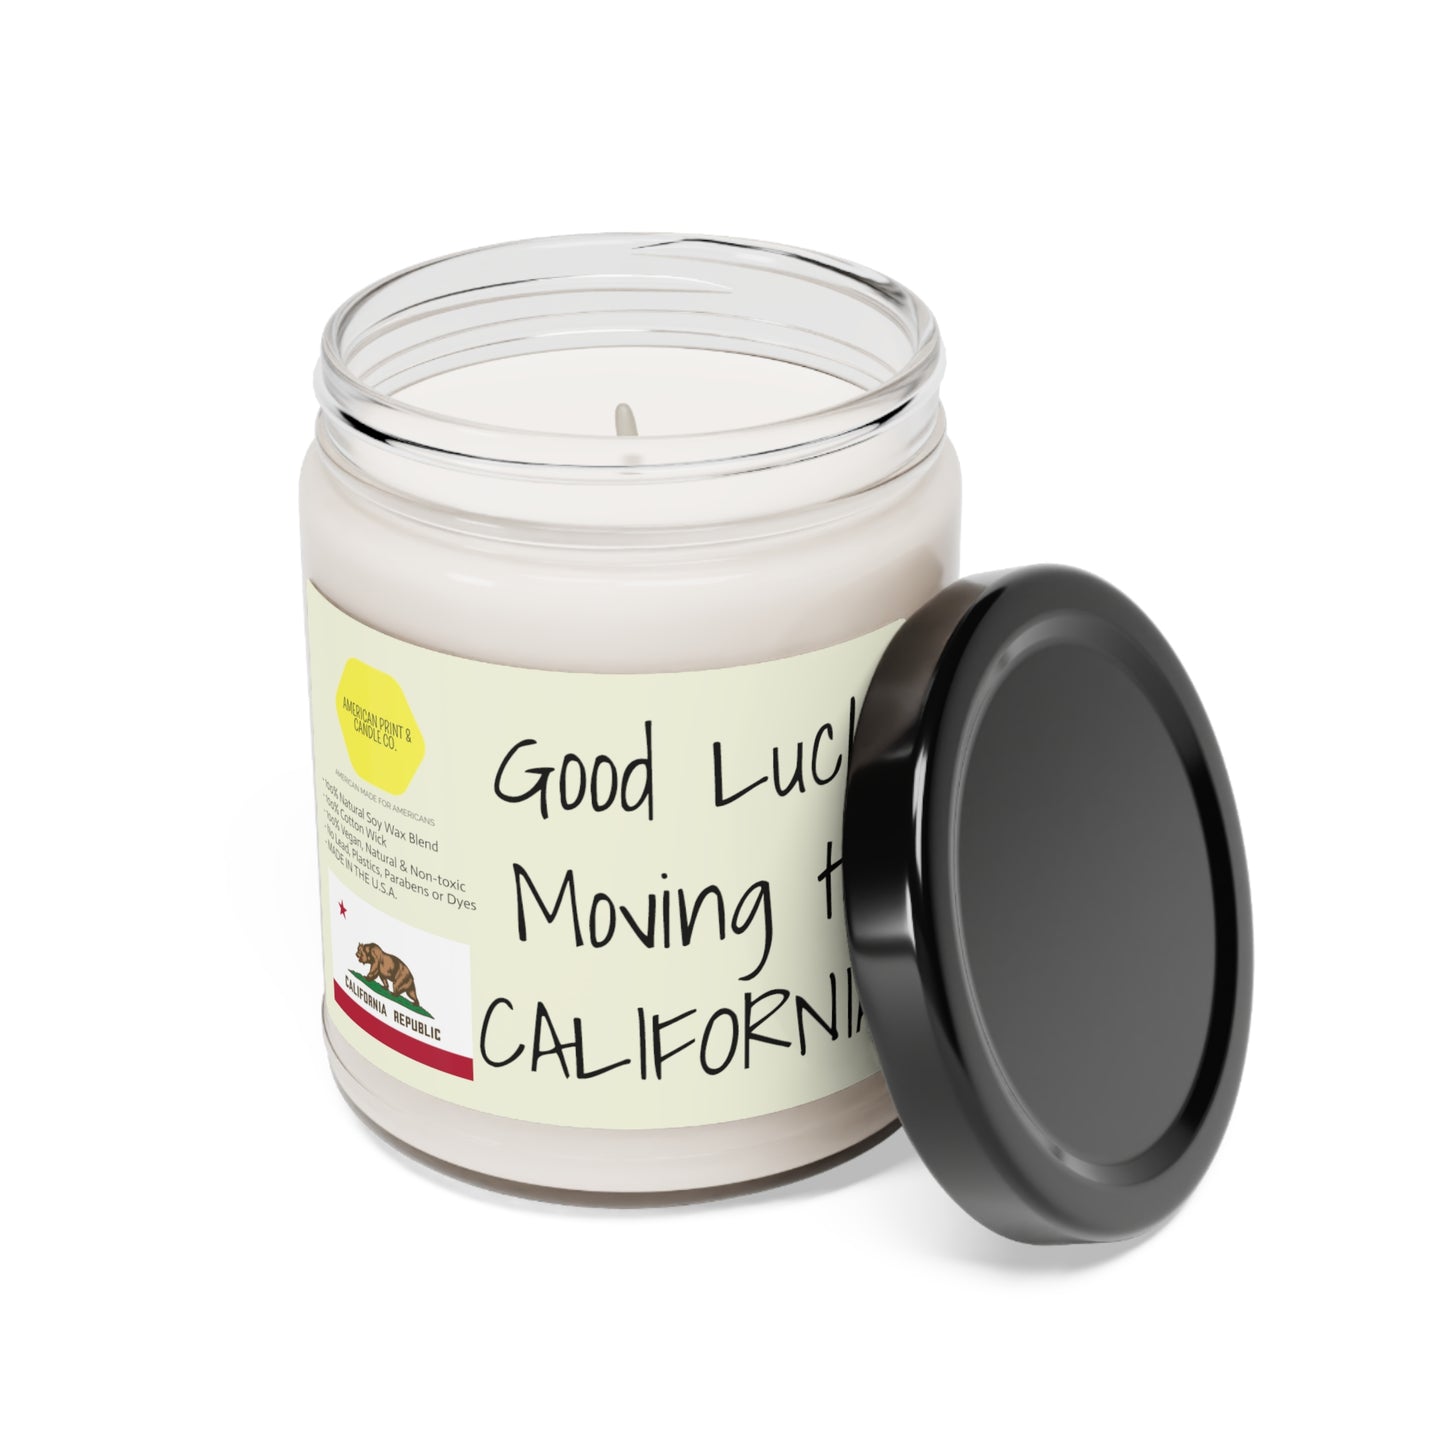 Good Luck moving to California scented Soy Candle, 9oz